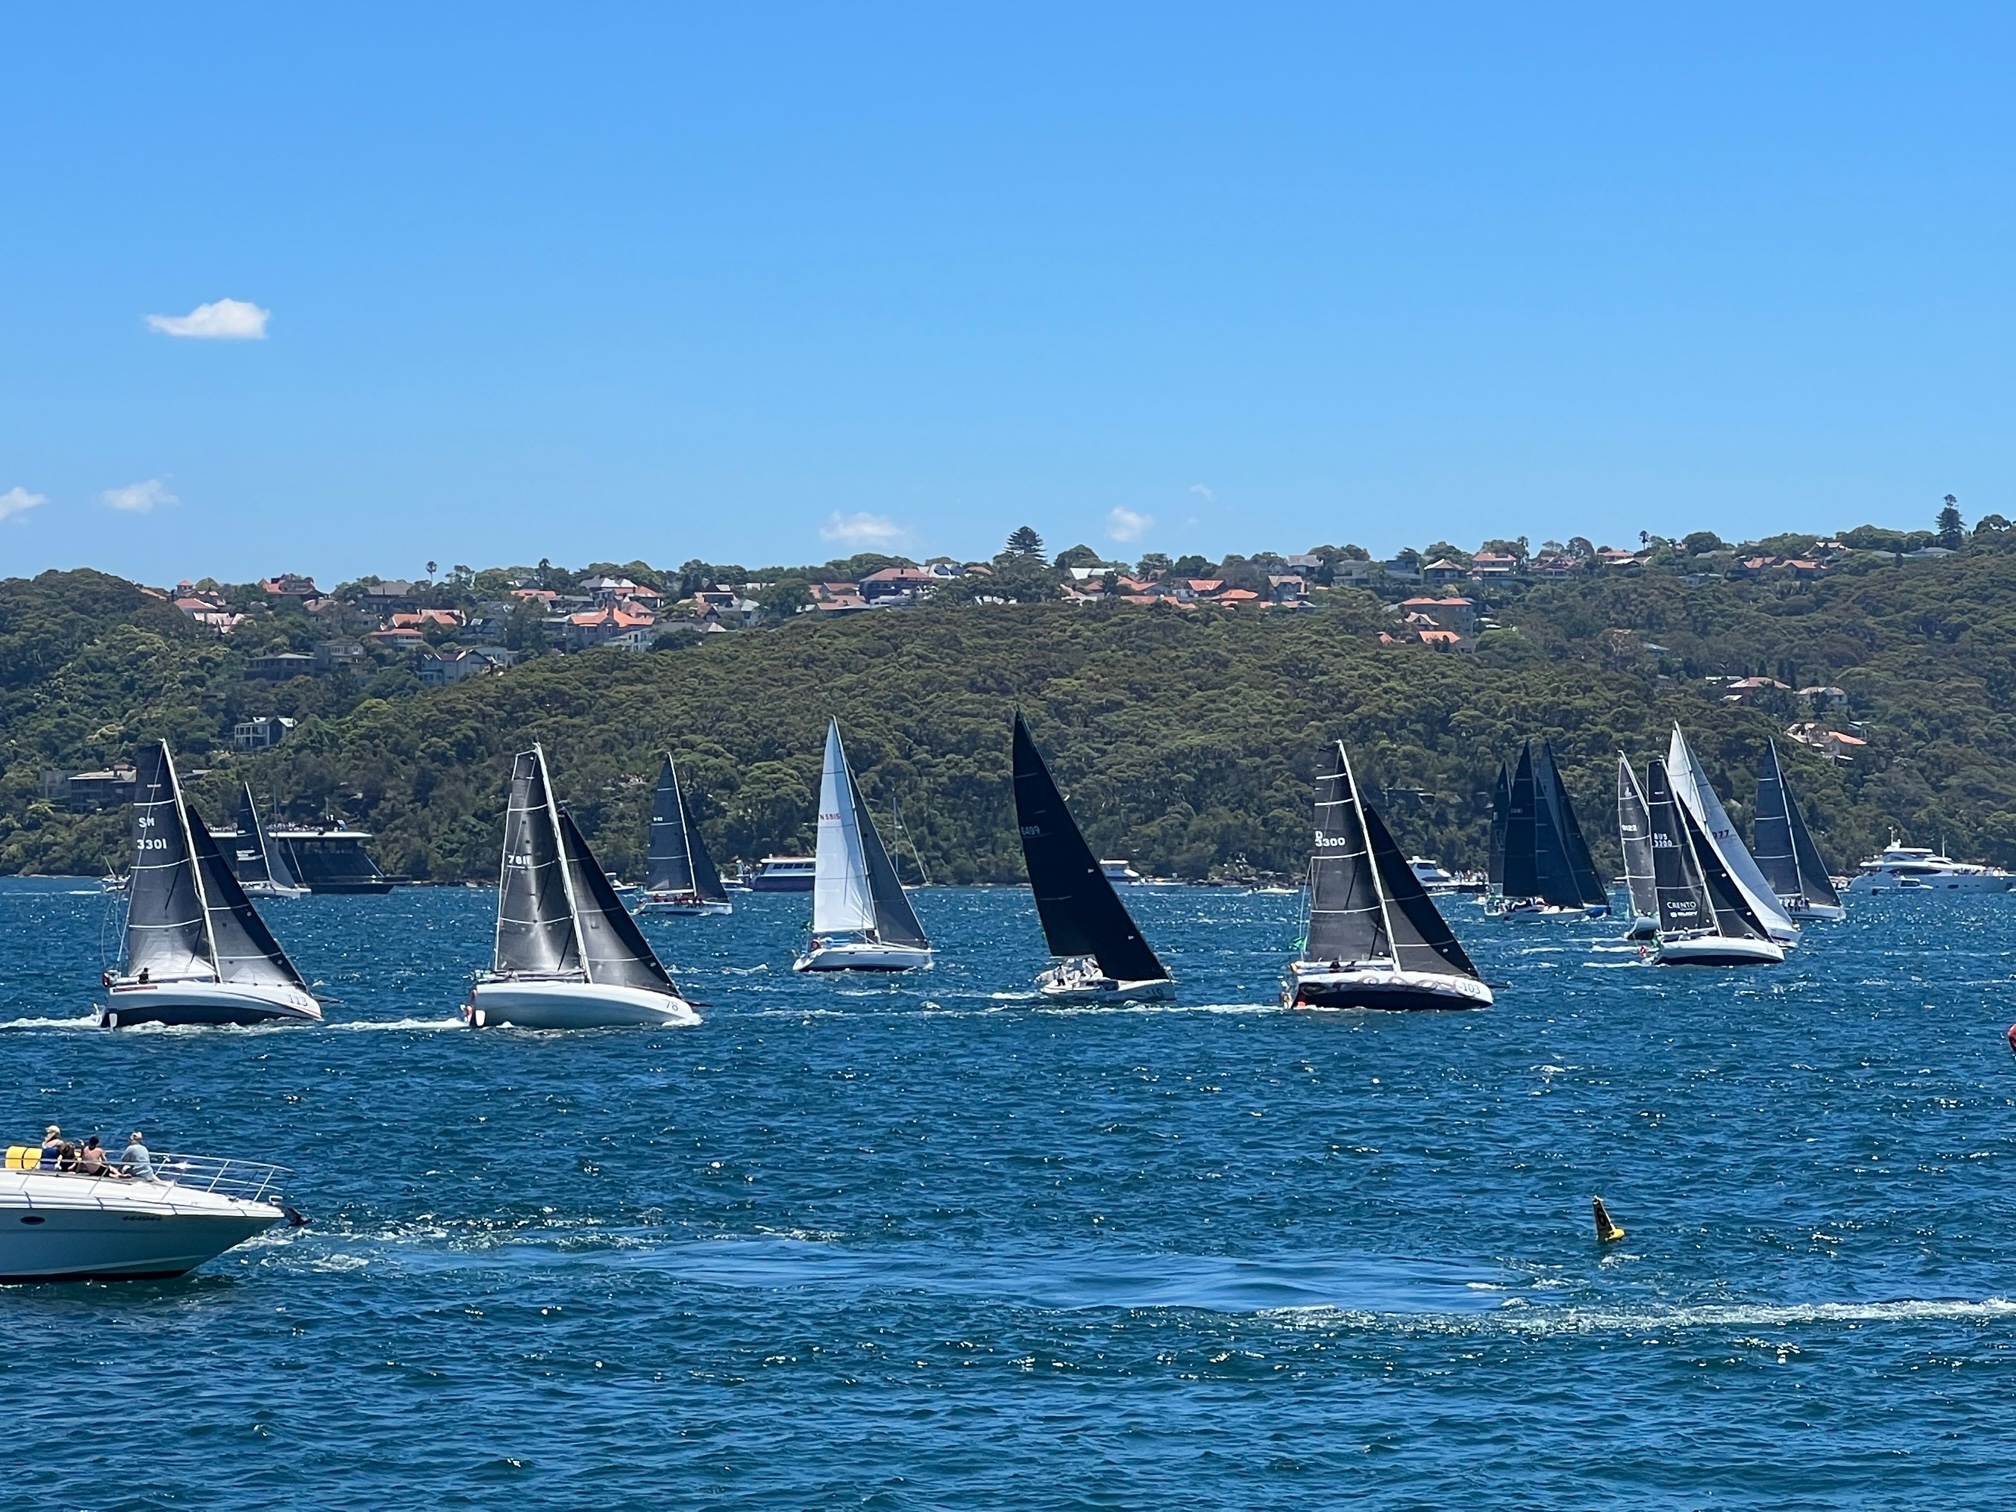 4 Sunfast 3300 on Starboard tack at the start of the Sydney to Hobart